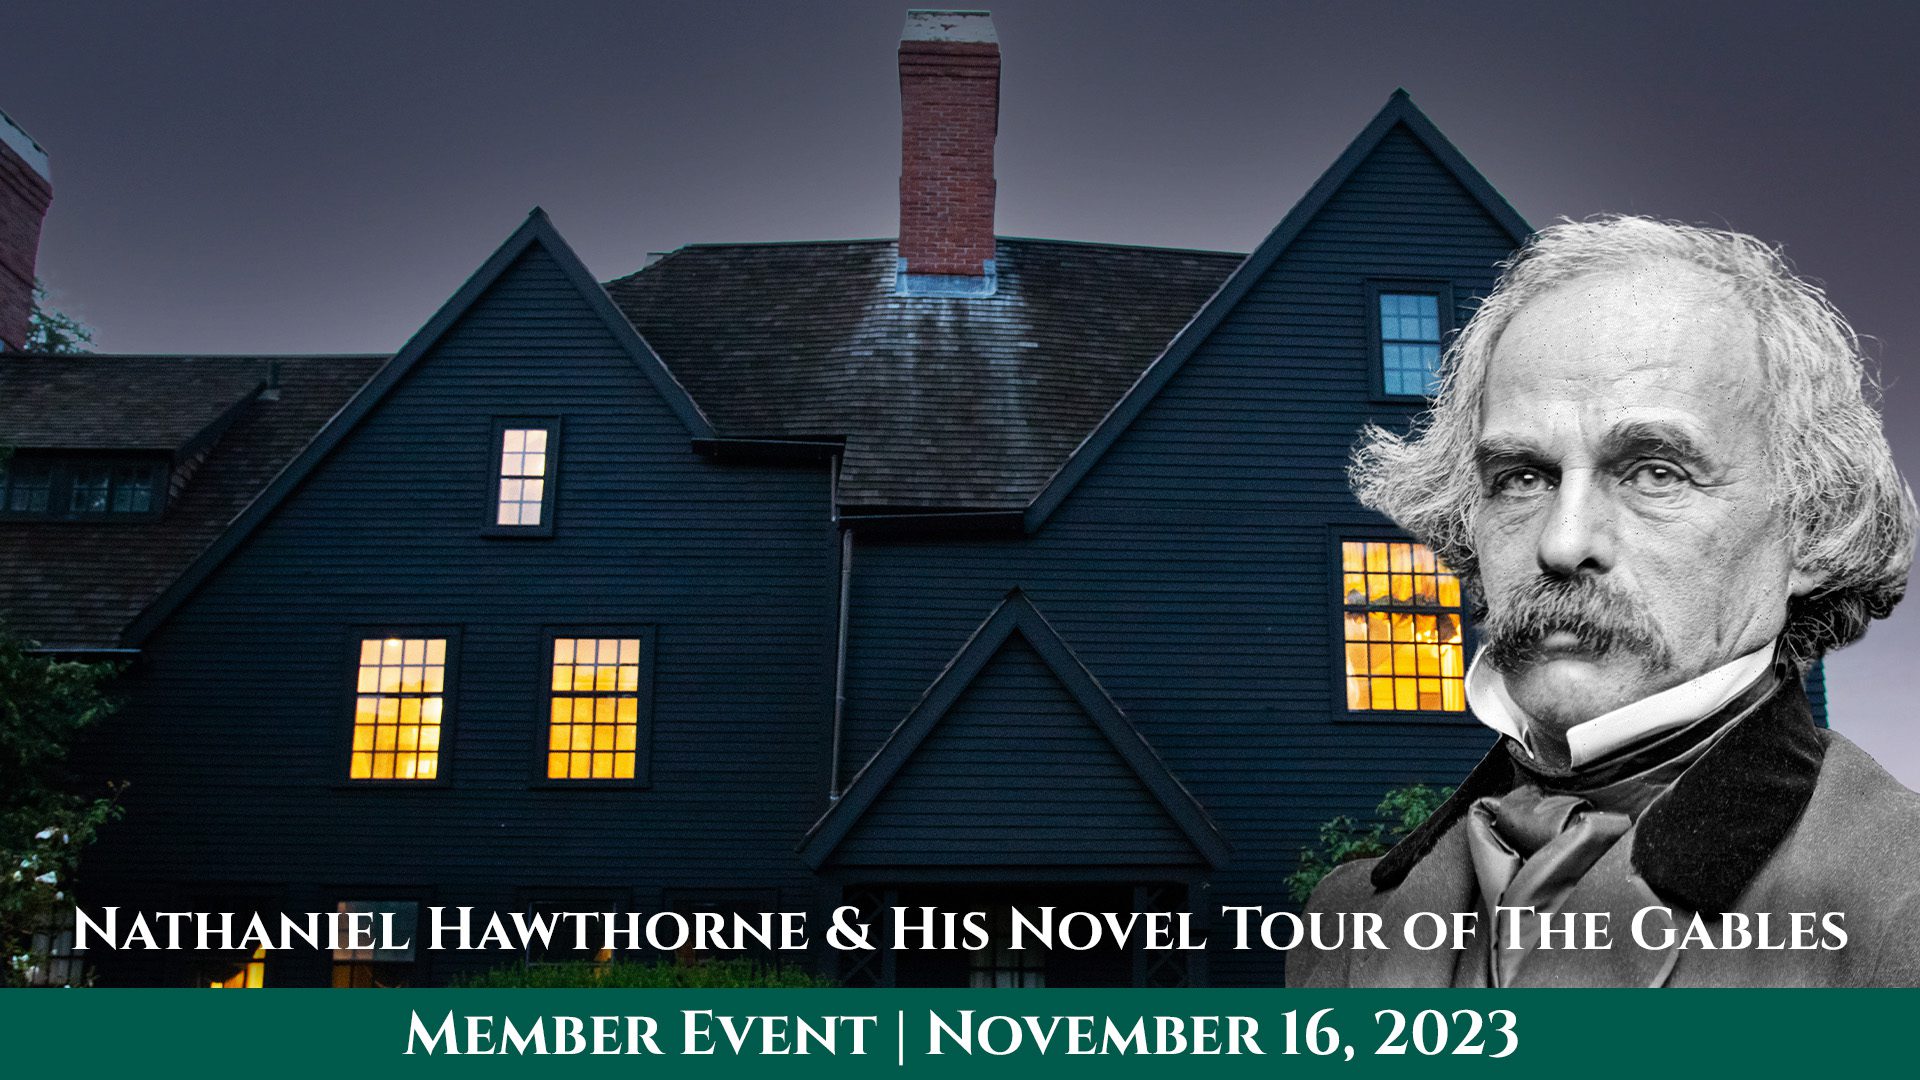 Nathaniel hawthorne and his novel tour the cables.